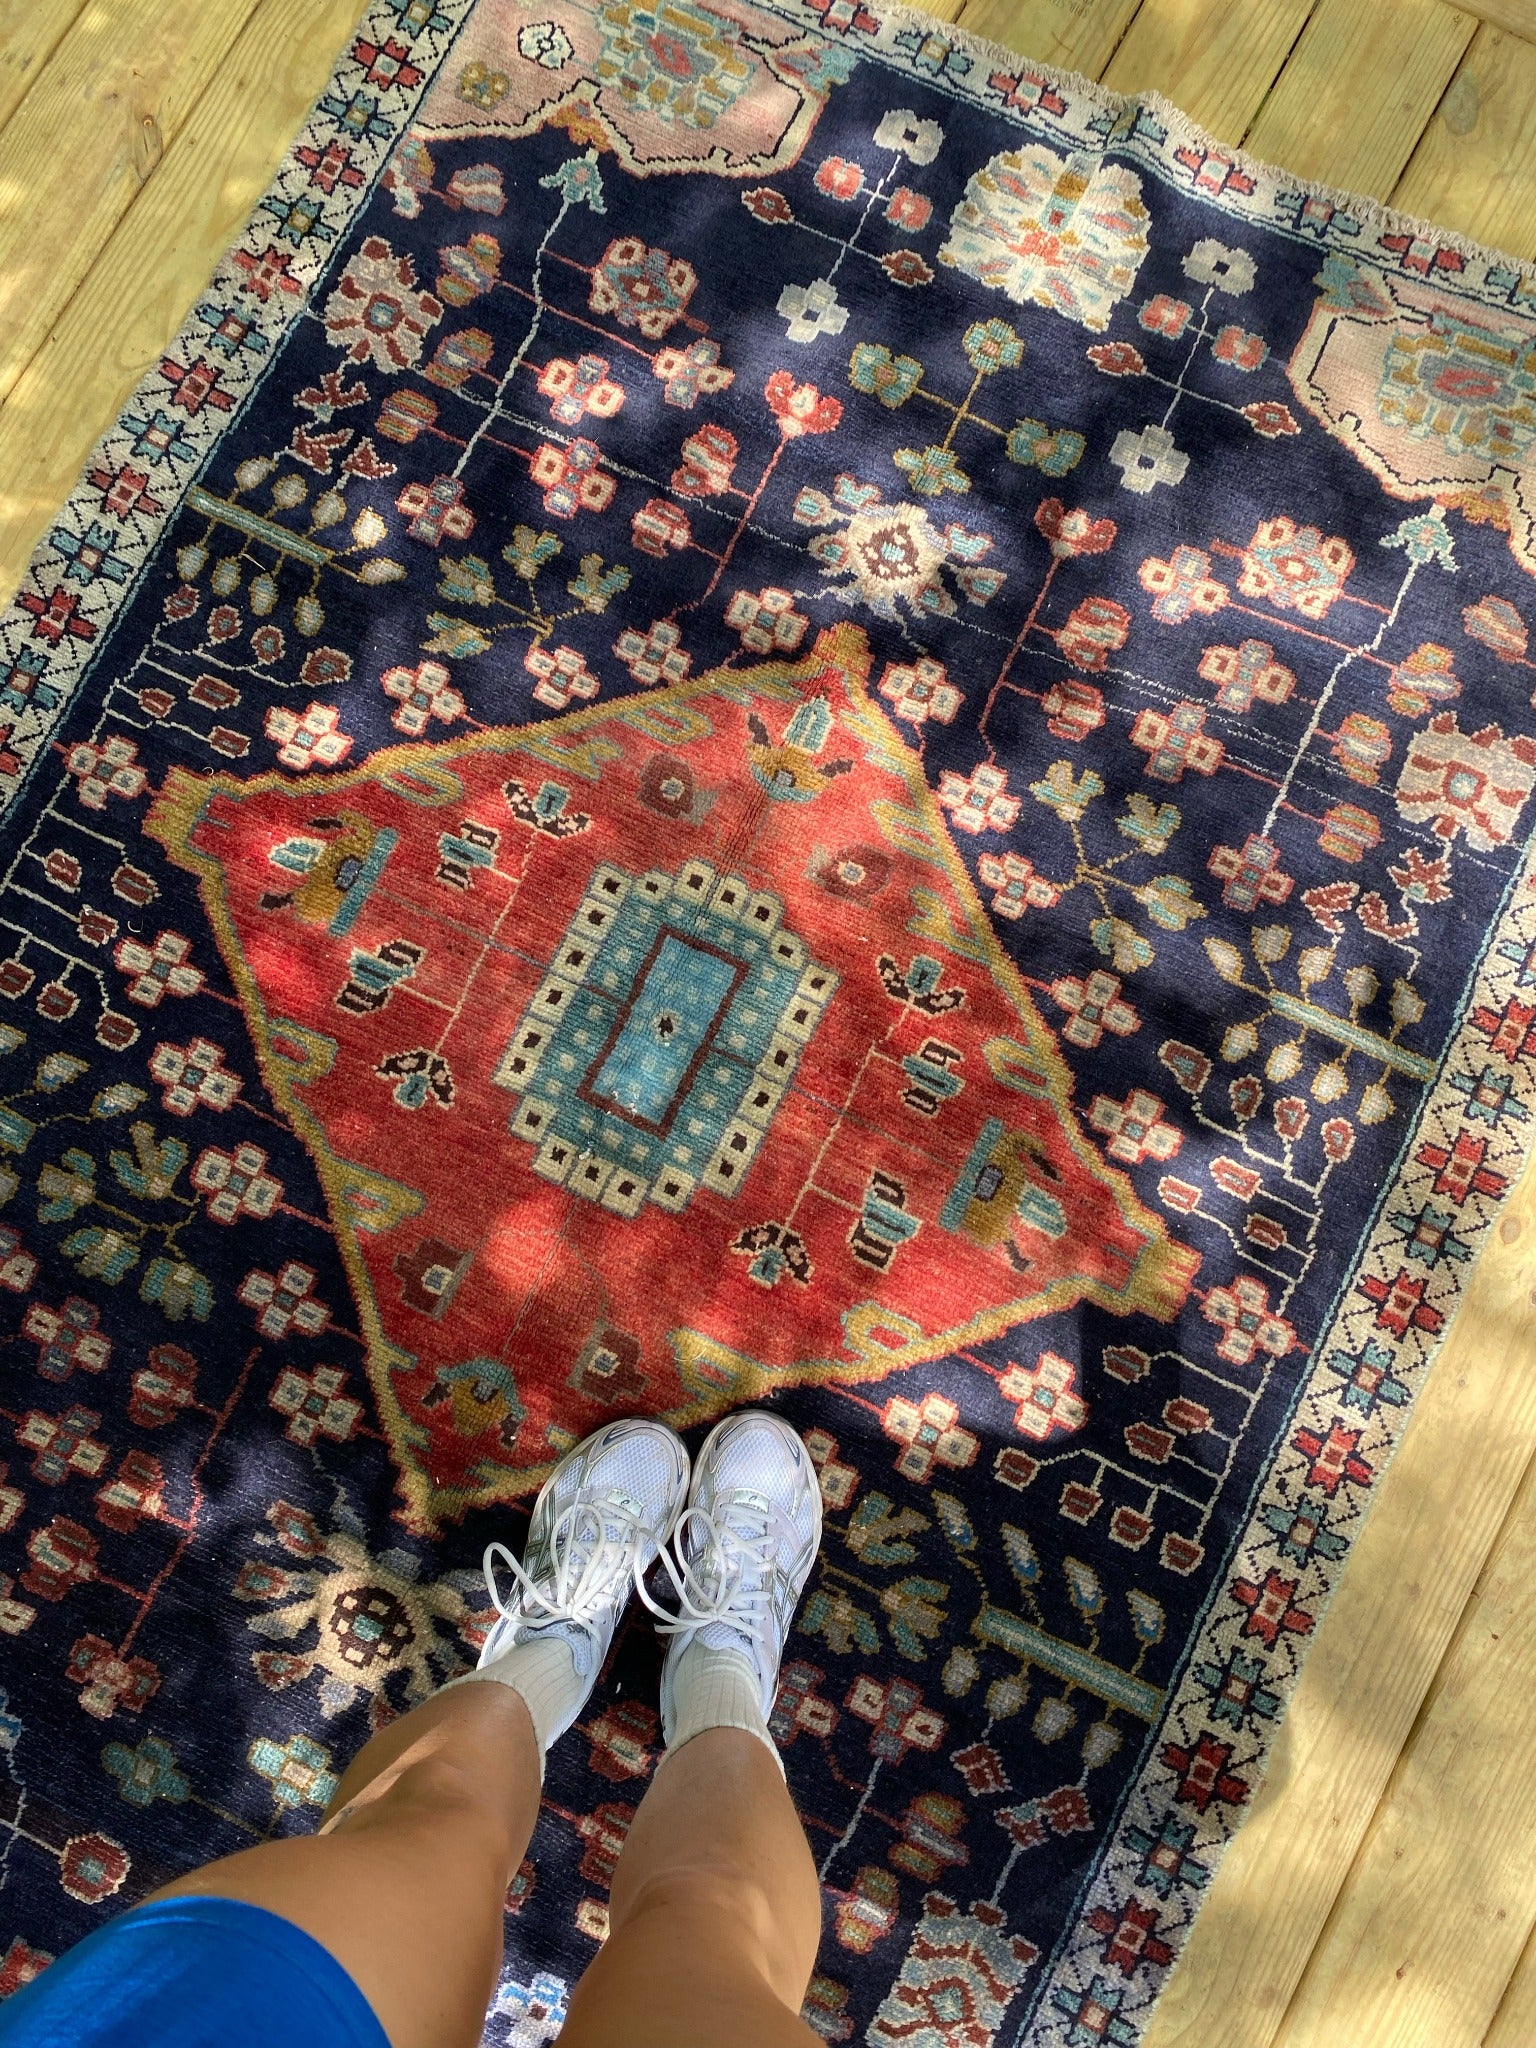 See Vintage Persian Rug and Floral Motifs From Overhead in Dappled Light